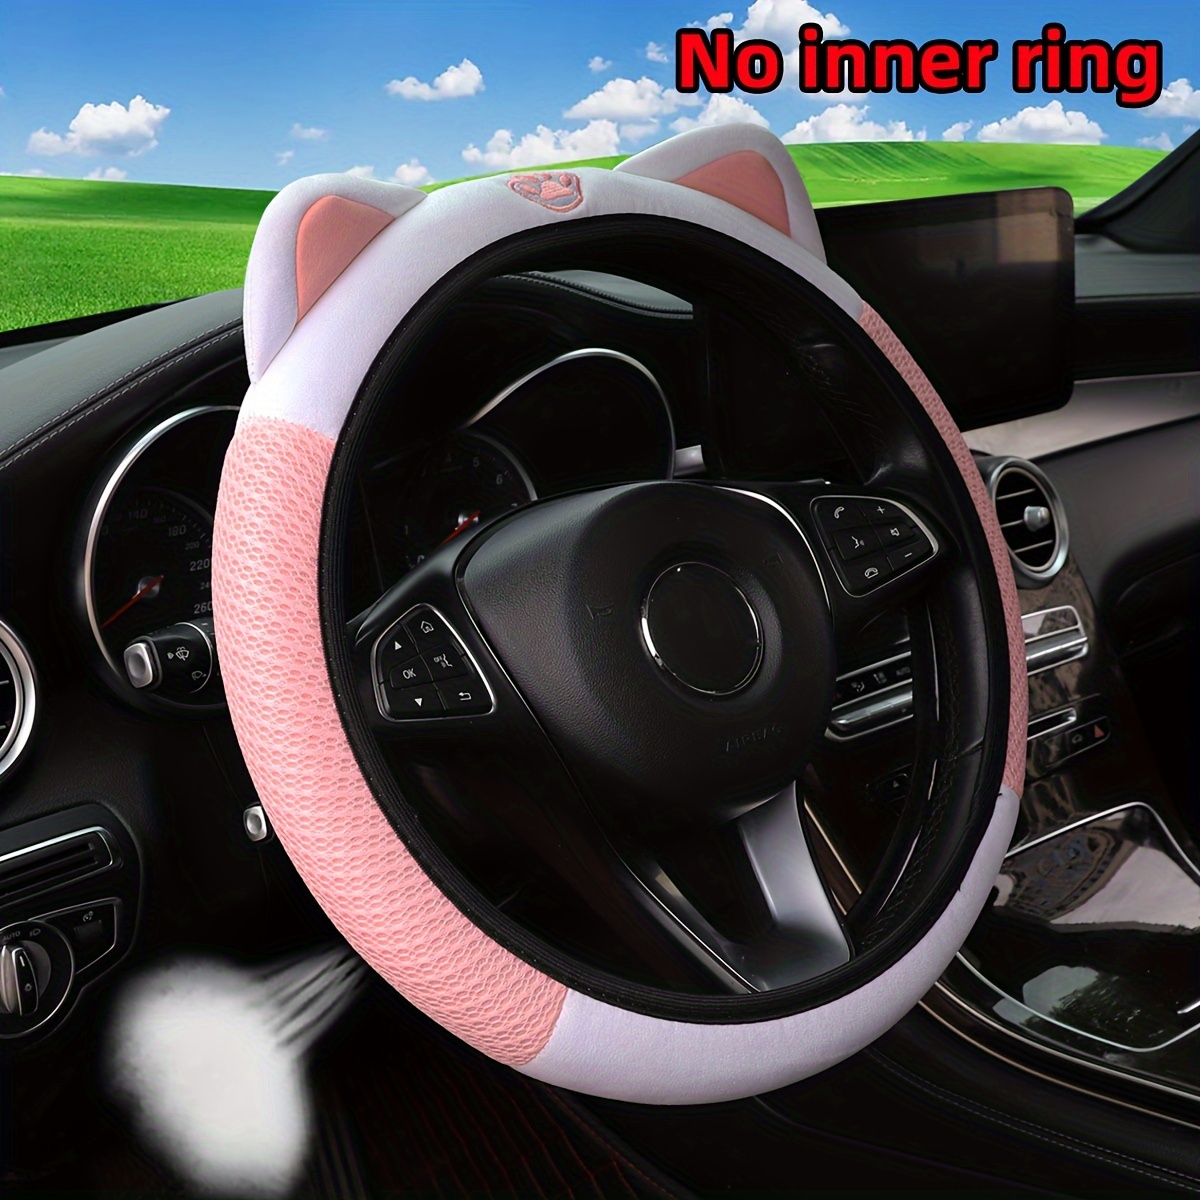 

Cute Cat Design Breathable Mesh Steering Wheel Cover, Polyester Fiber Material, No Inner Circle, Fits 14.5-15 Inch Steering Wheels - Universal Fit For Cars